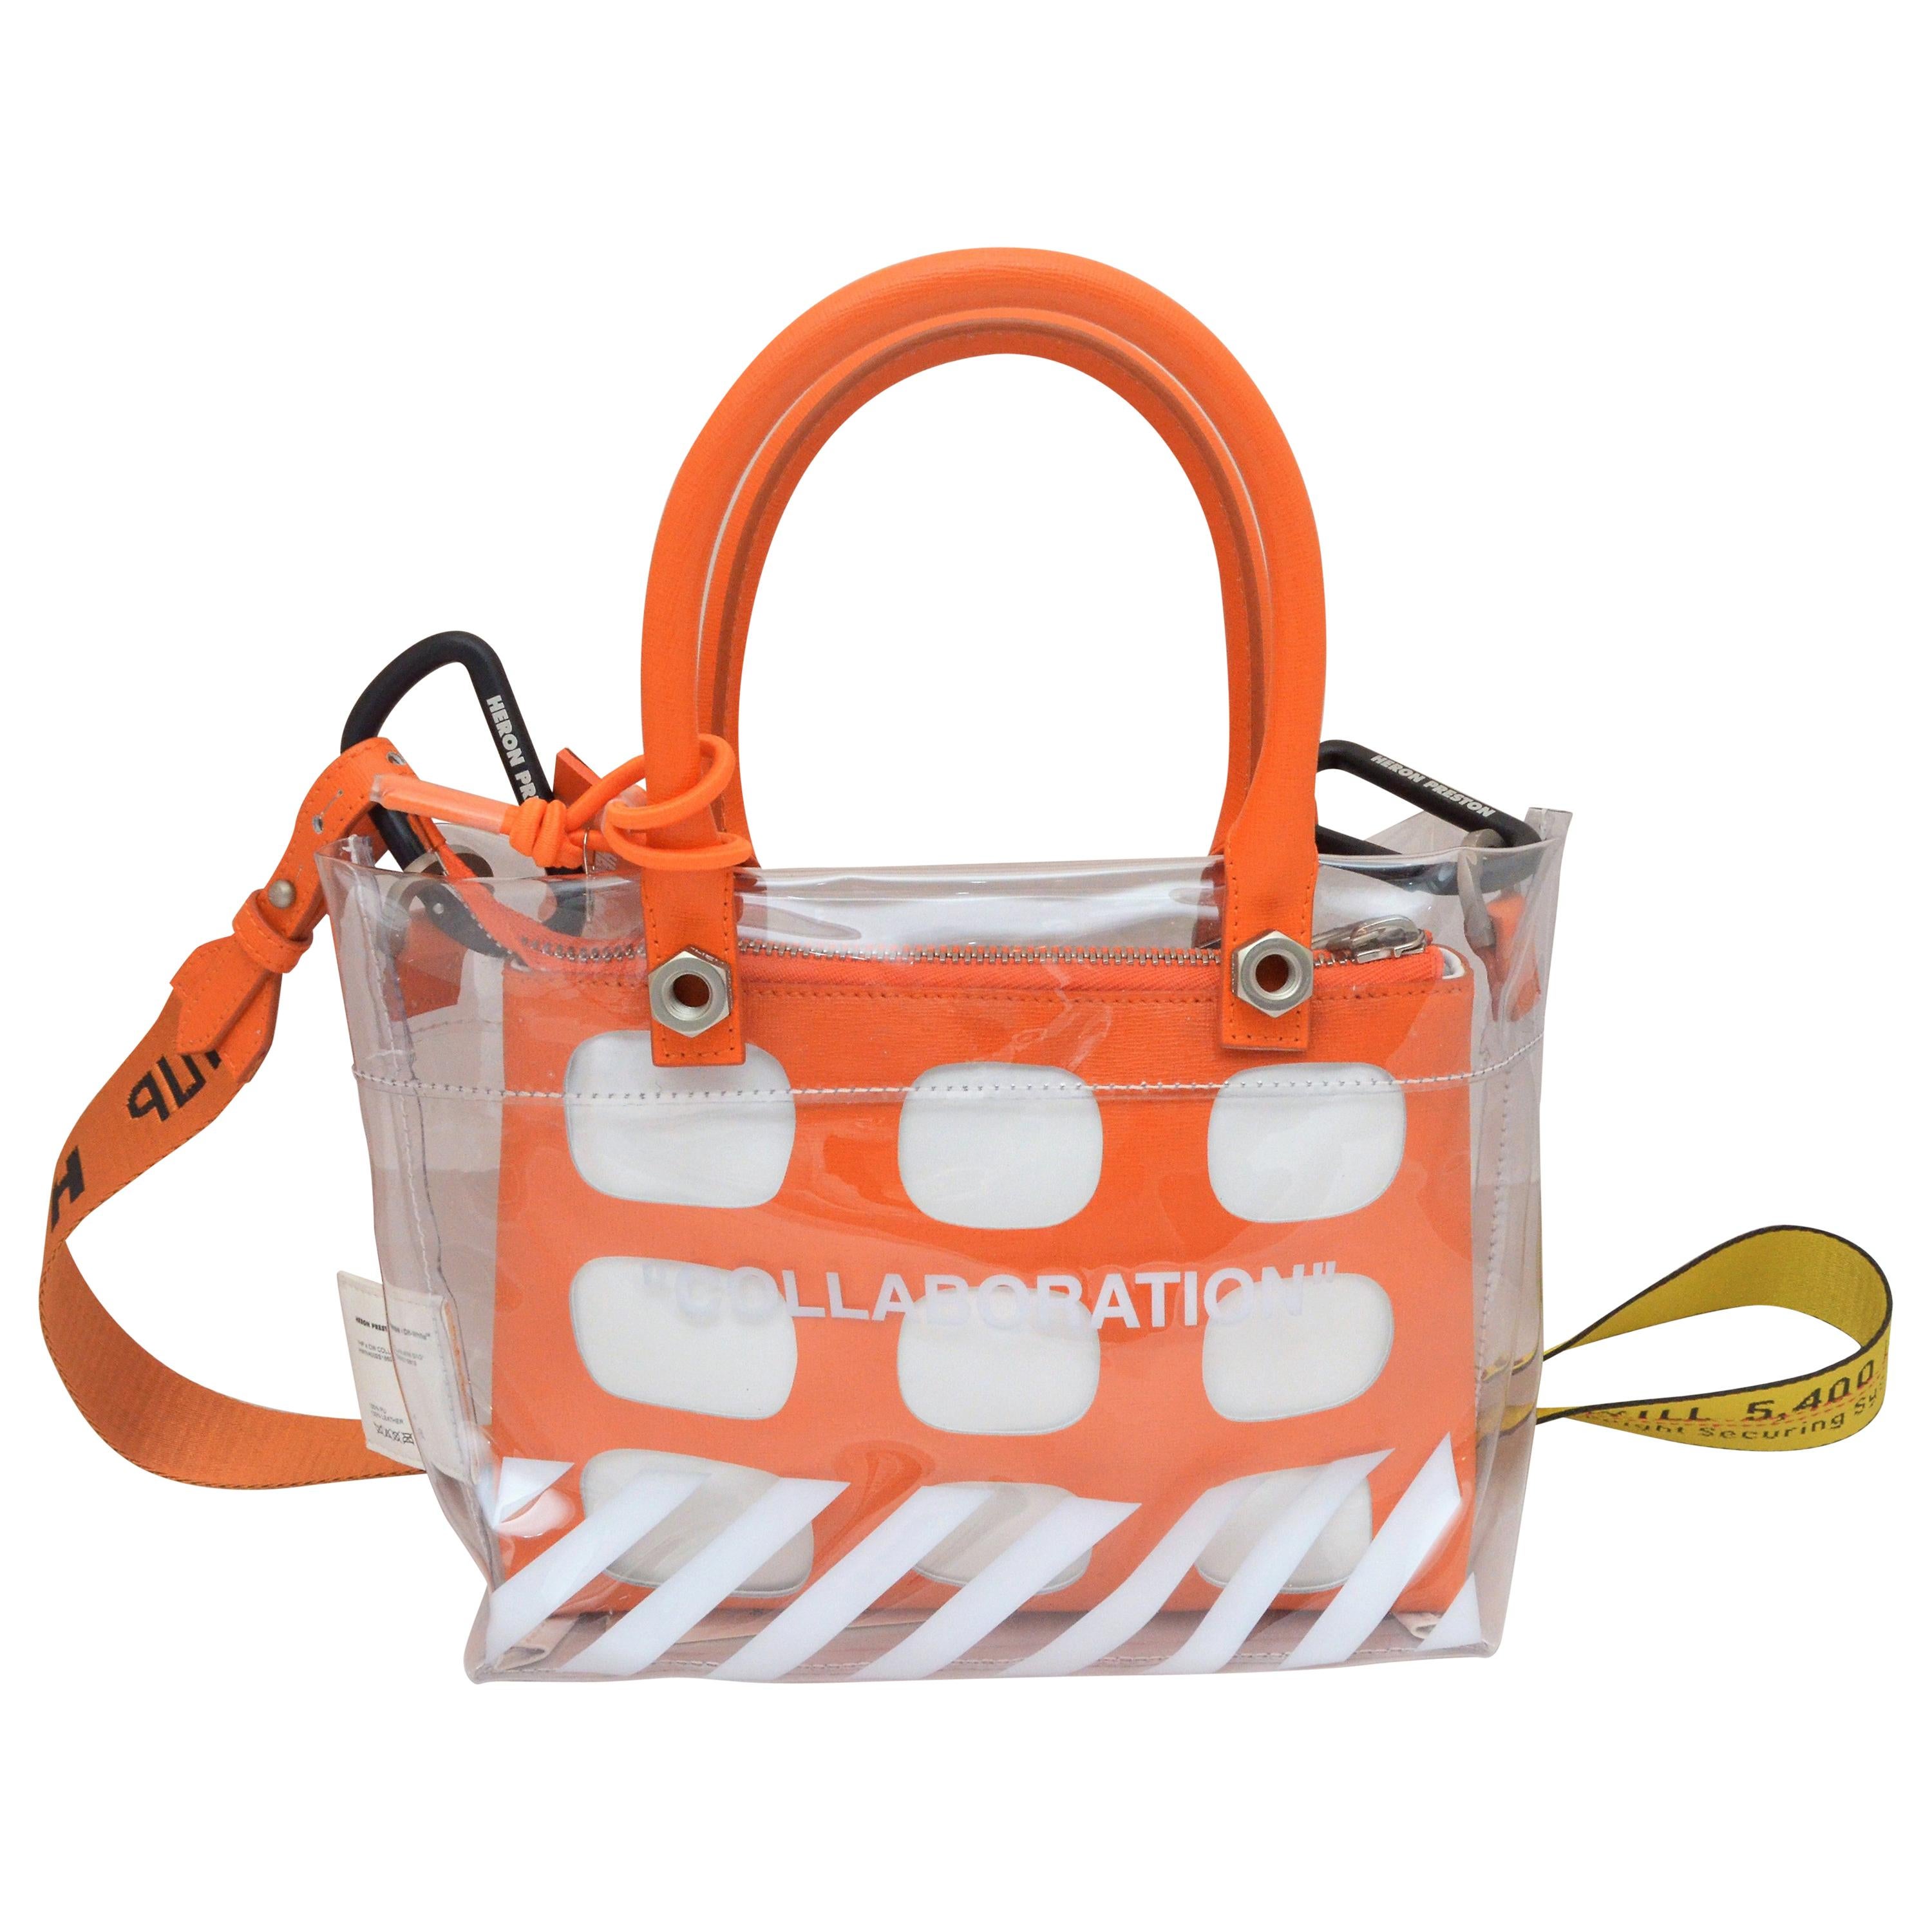 Off White x Heron Preston Collaboration Tote Bag with Industrial